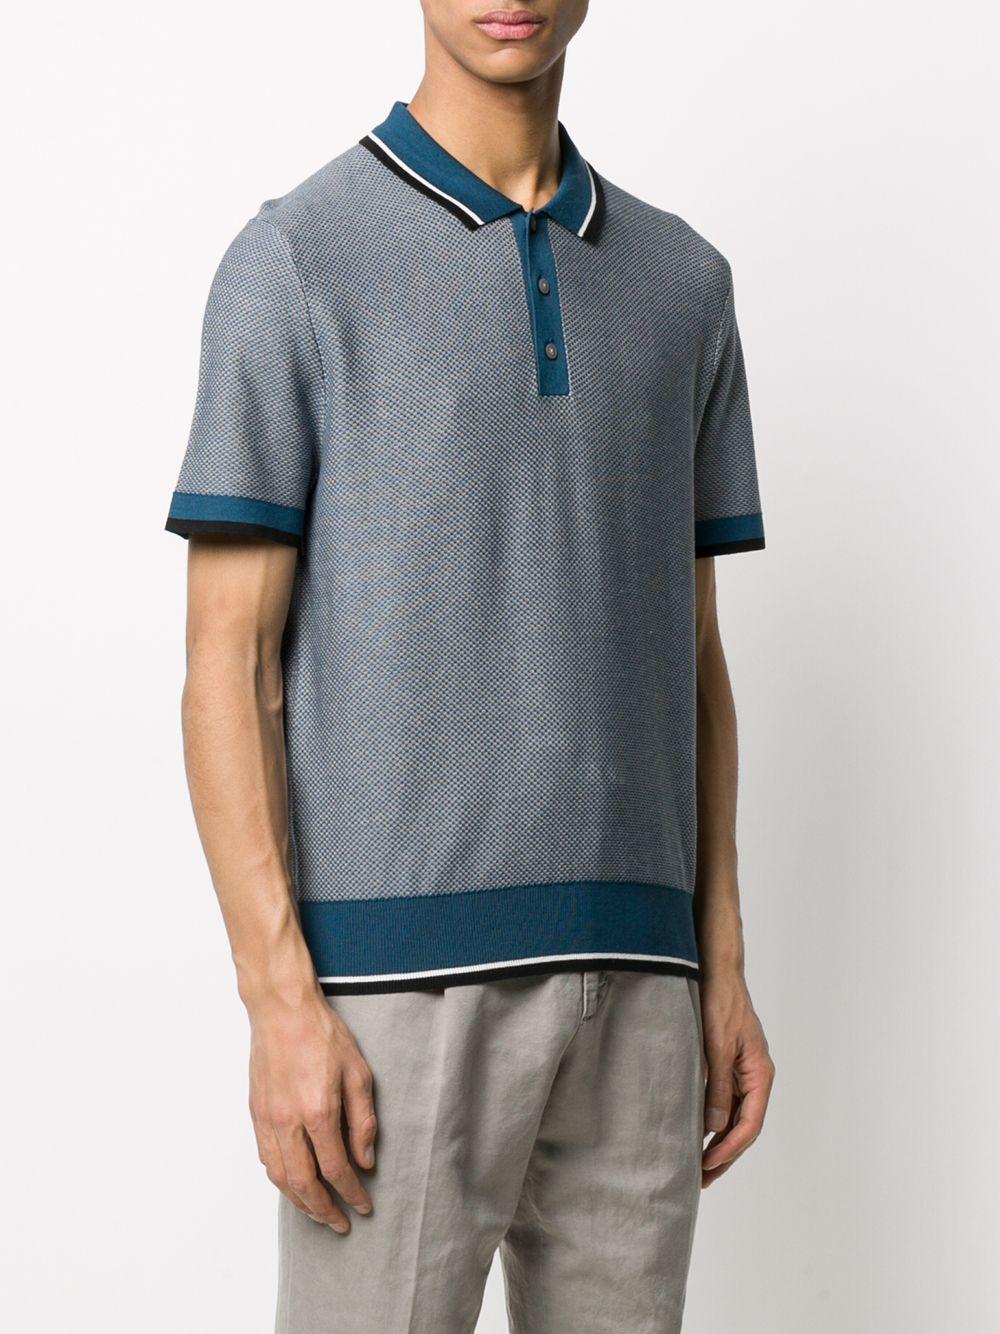 Z Zegna Contrast Trim Polo Shirt in Blue for Men - Lyst